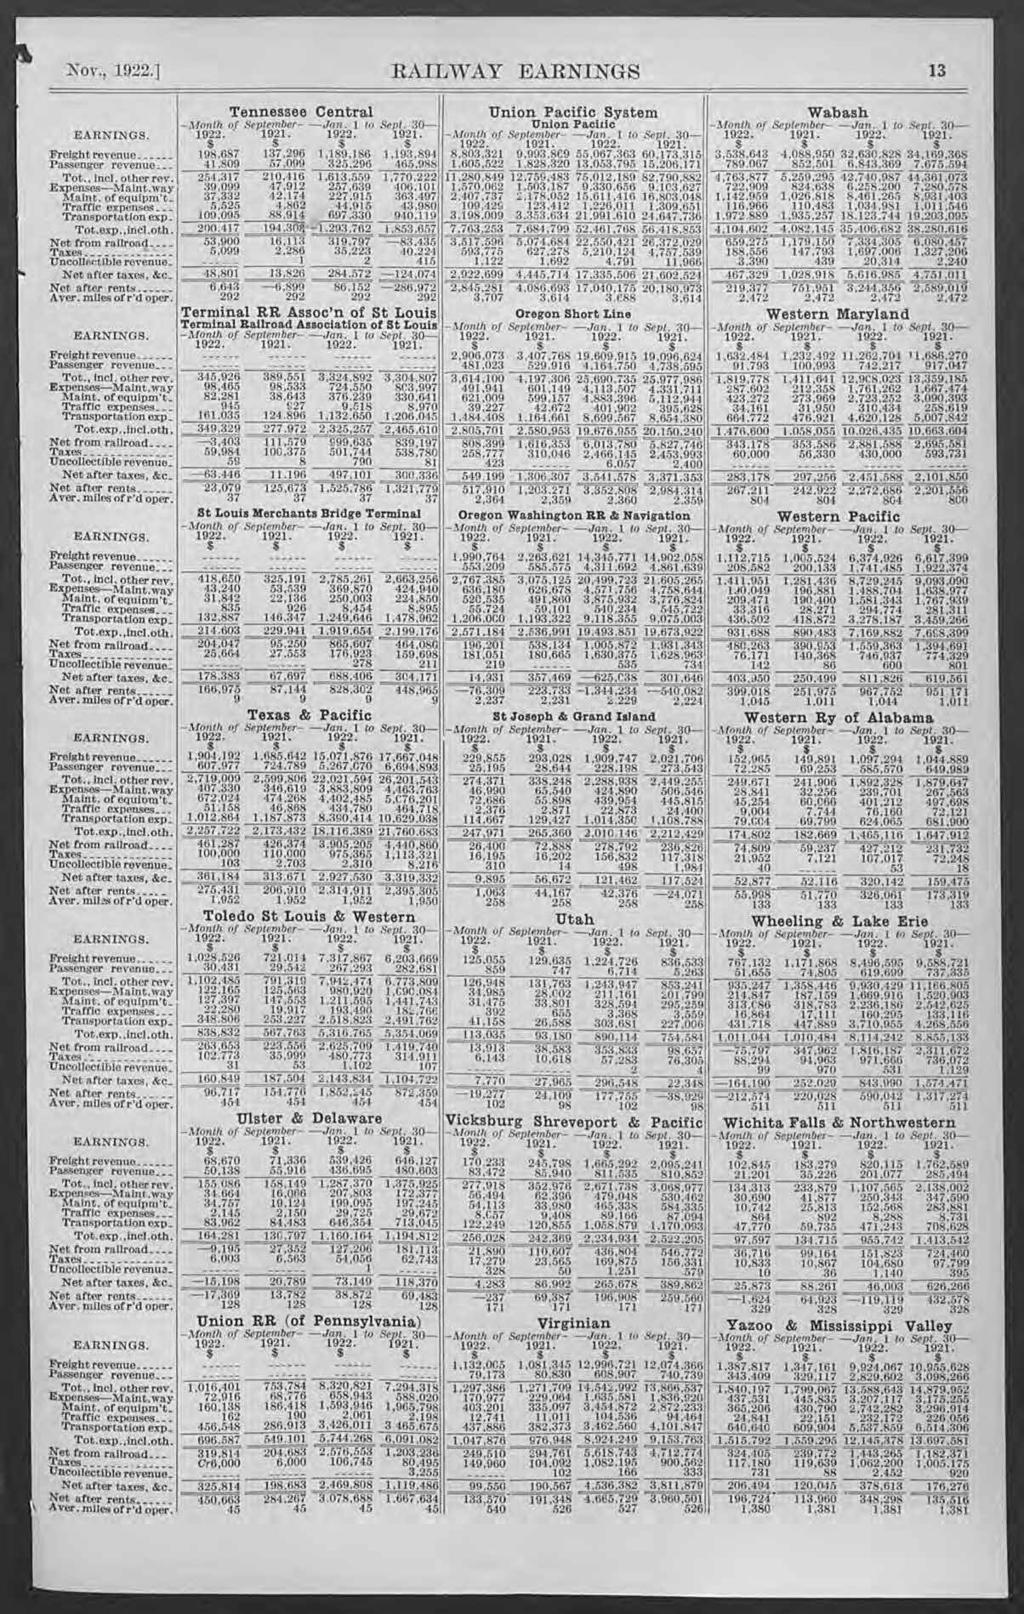 Nov., 1922.] RAILWAY EARNINGS 13 Net from railroad.... Transportation exp. Passenger revenue. Traffic expenses Tot.exp.,Incl.oth. Uncollectible revenue Net after taxes, &c Maint.